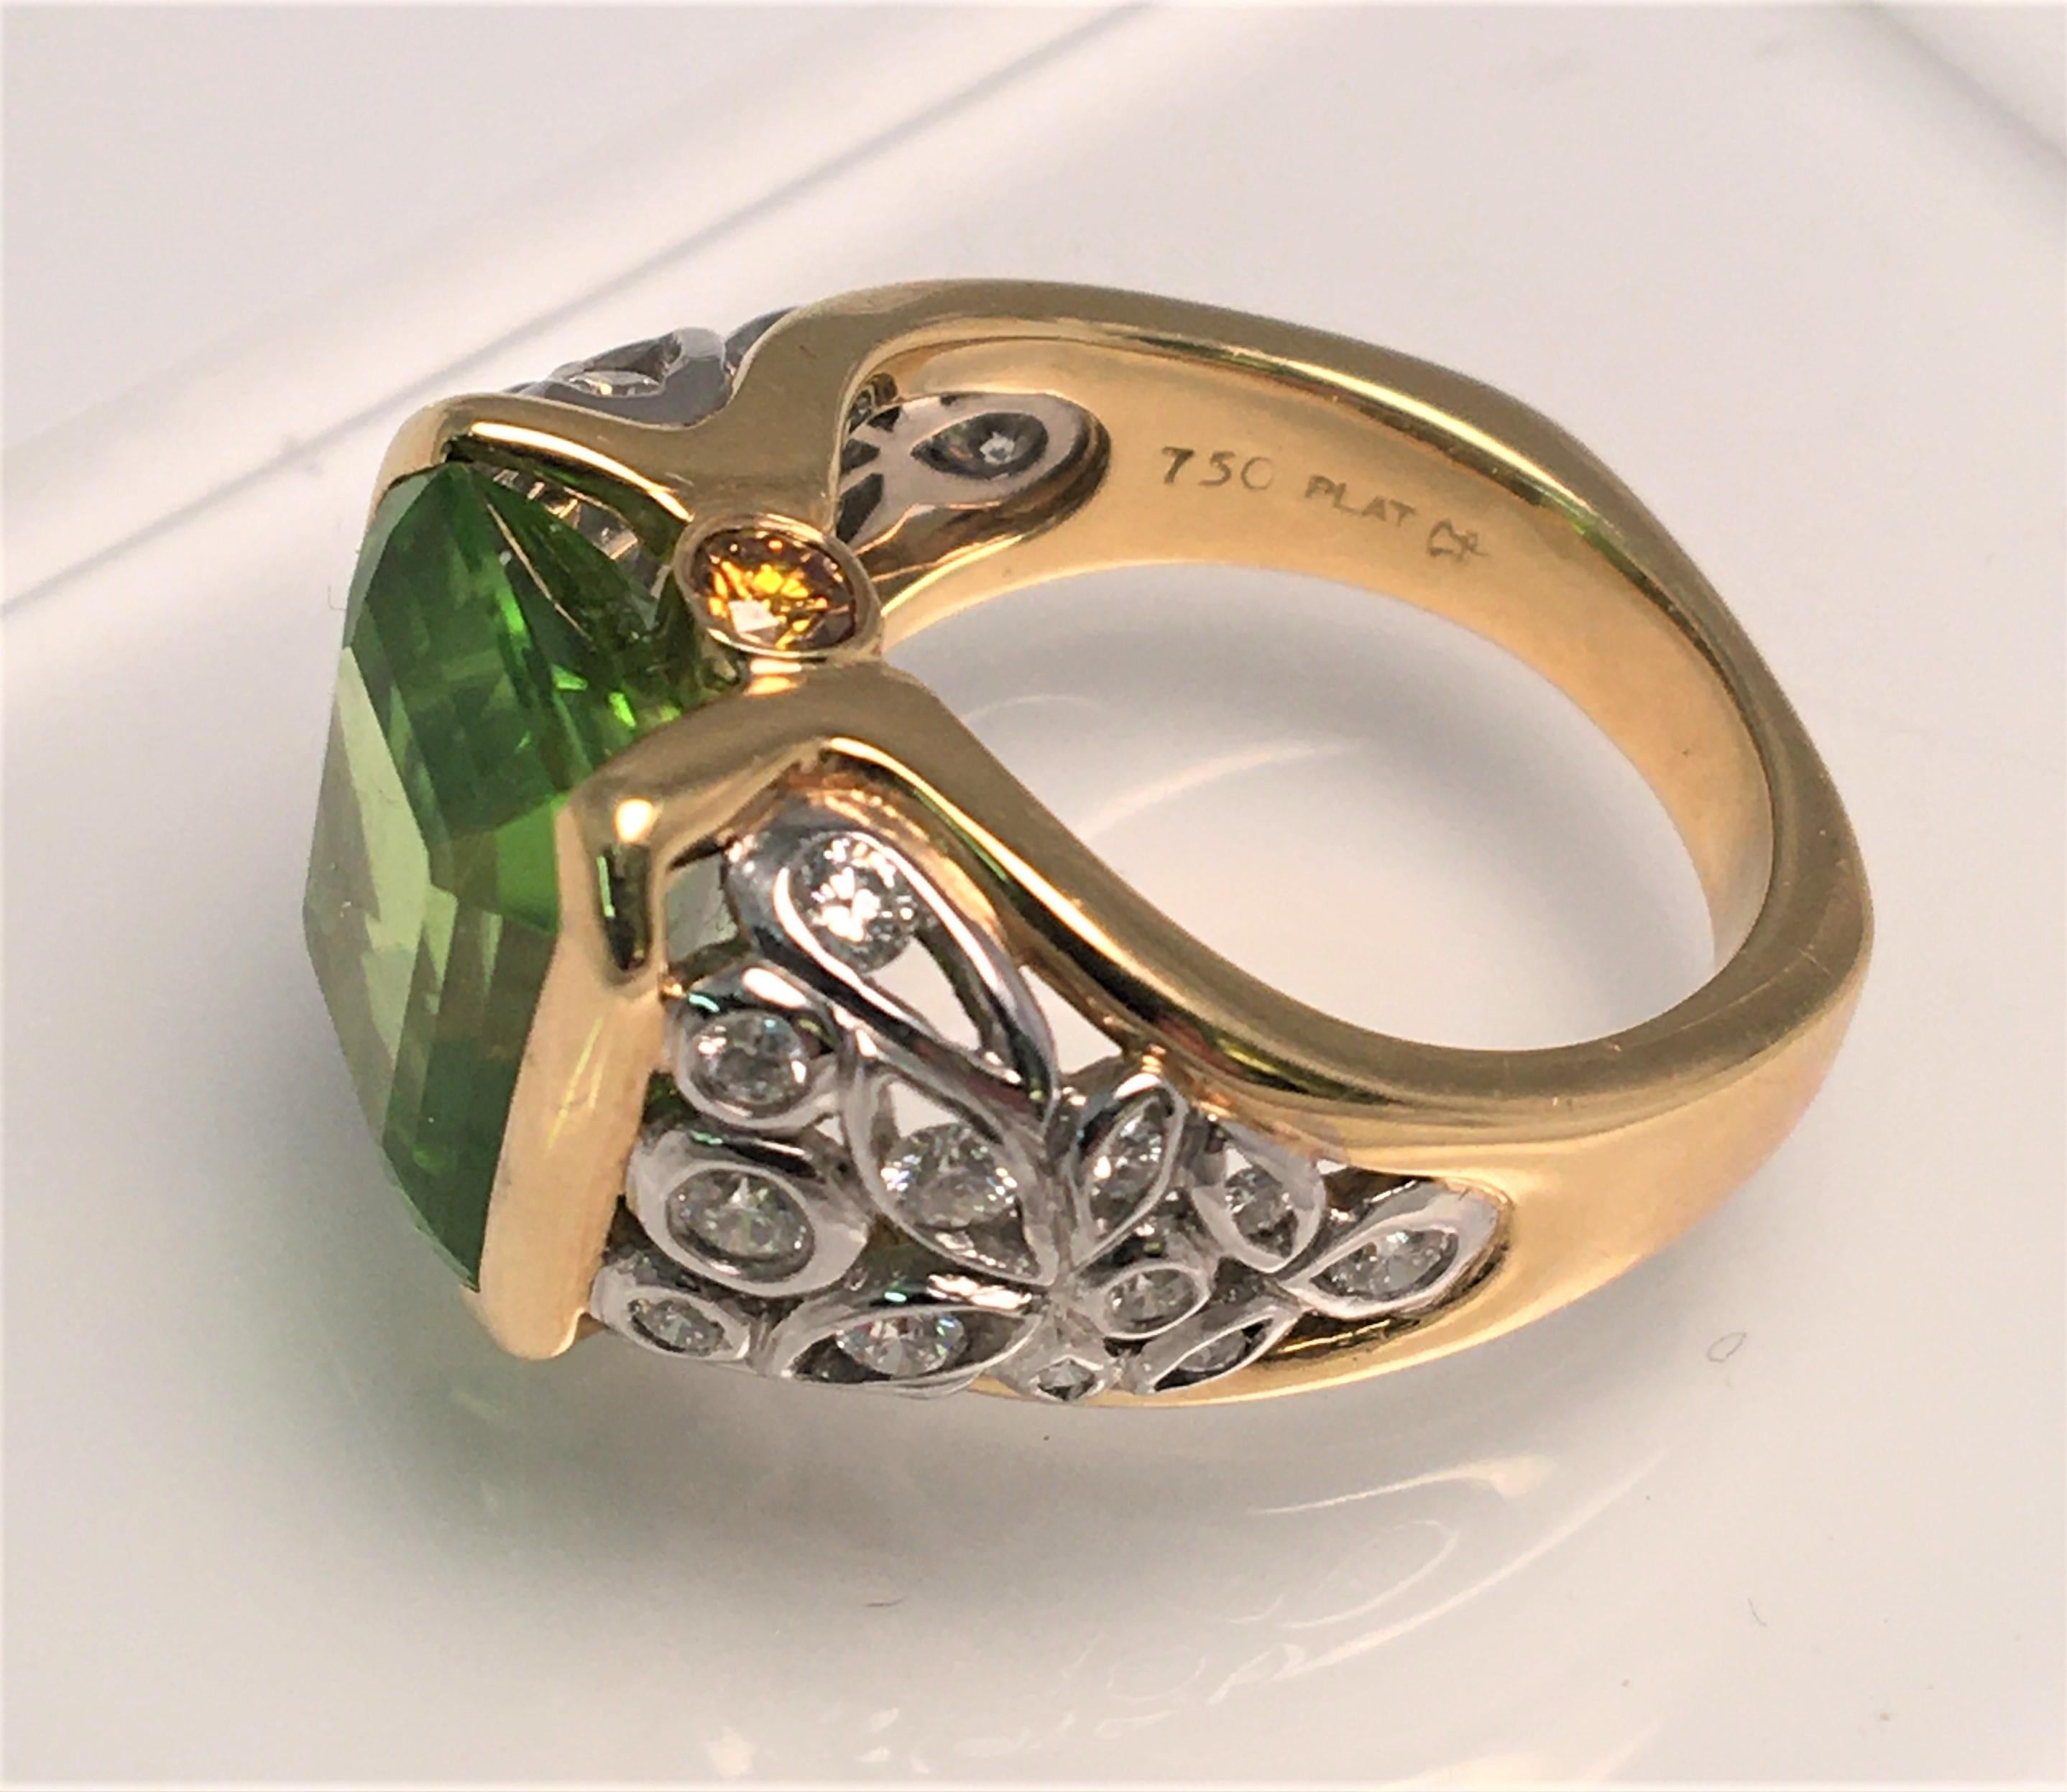 By designer Richard Krementz, known for high quality and exceptional stones.
This ring is an attention grabber!  It's beautiful green colored Peridot is complemented by a platinum, 18K yellow gold and diamond design/mounting.
Emerald cut peridot in